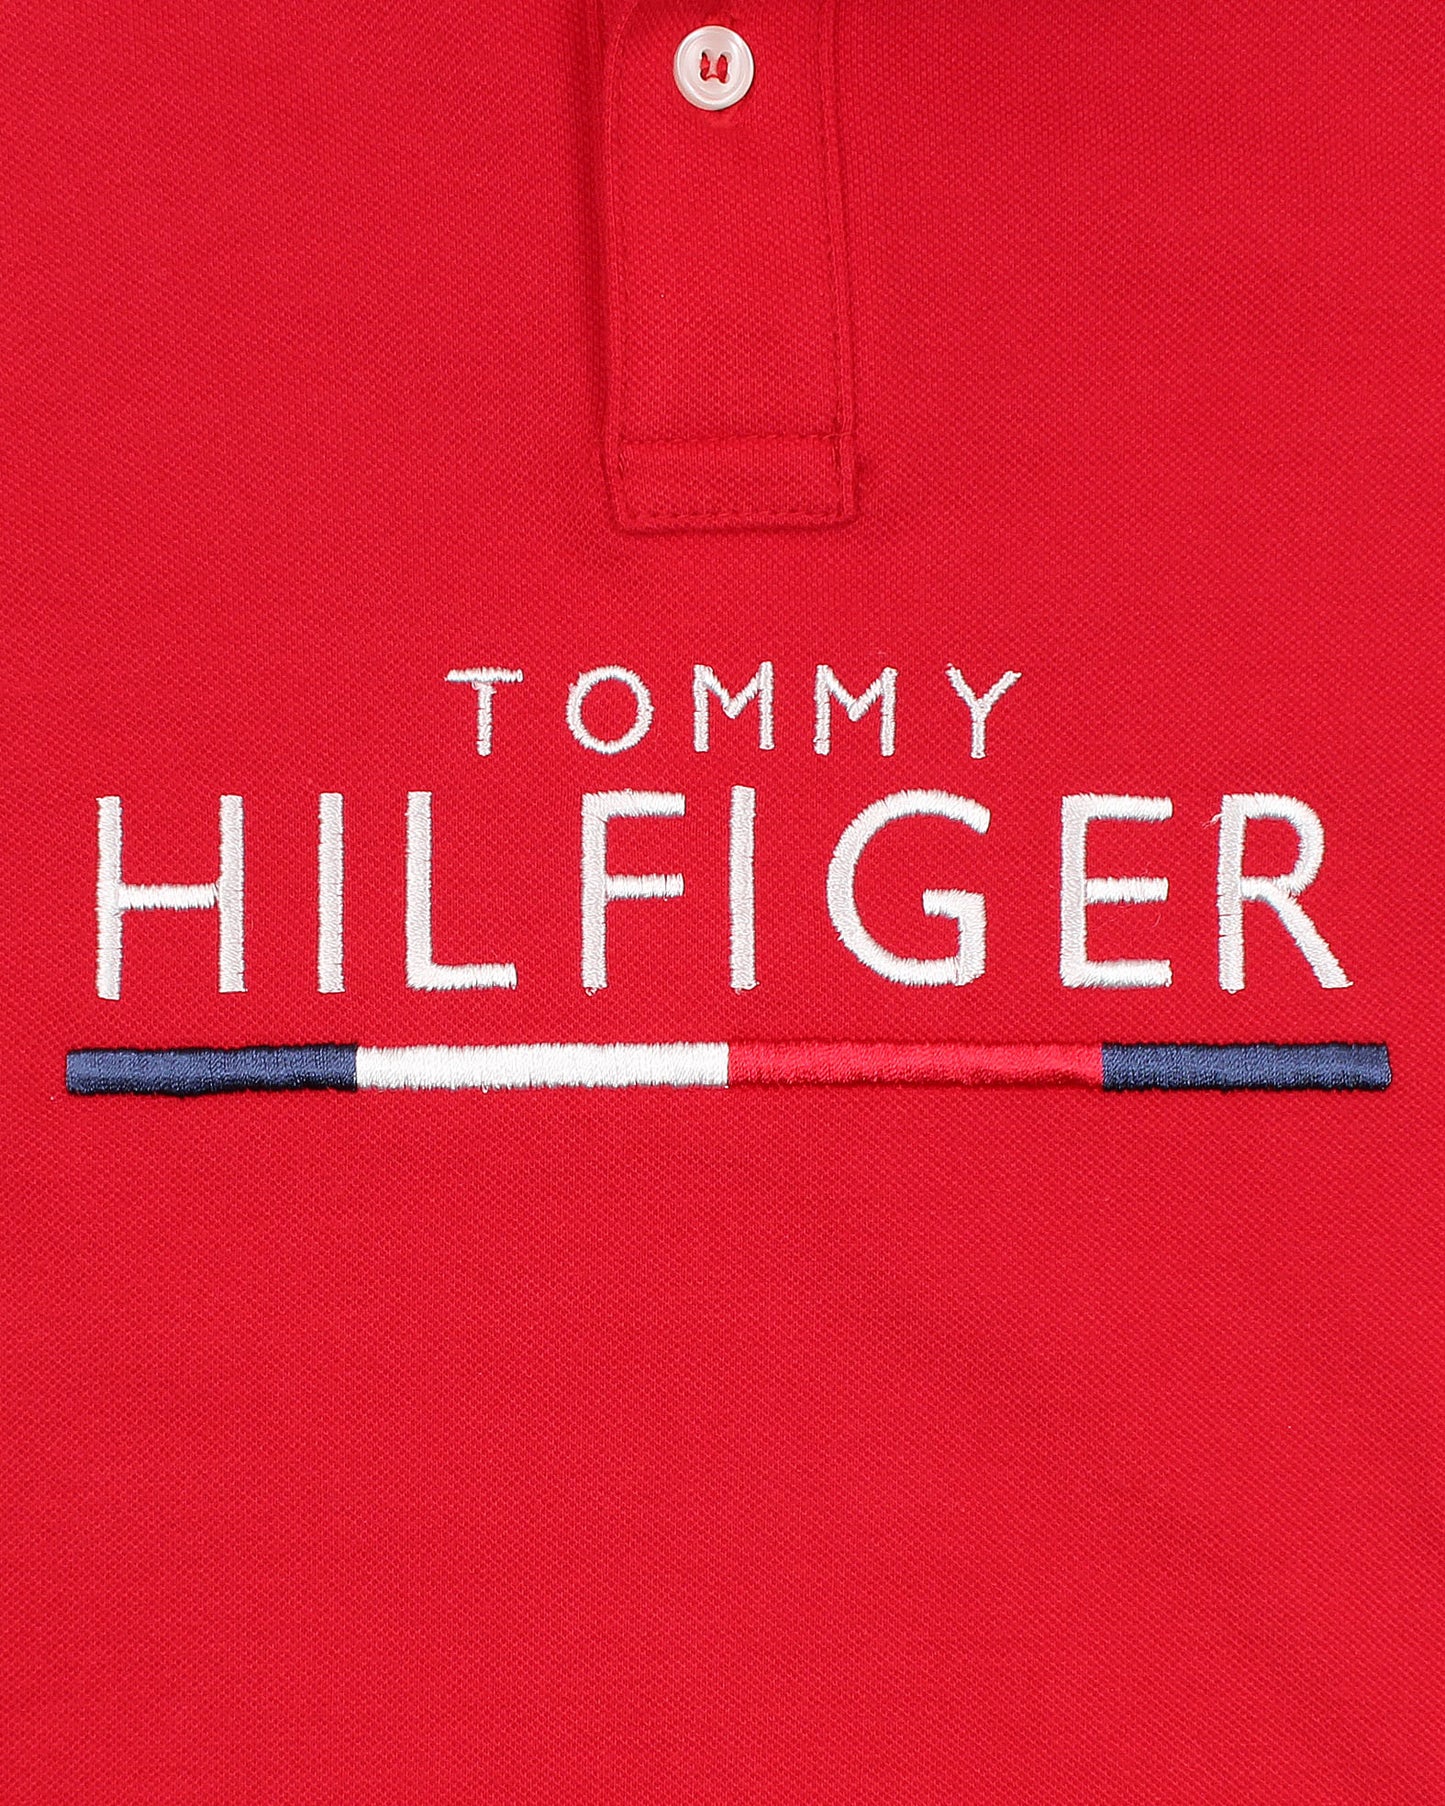 Premium Tommy Kids Polo Shirt - Red